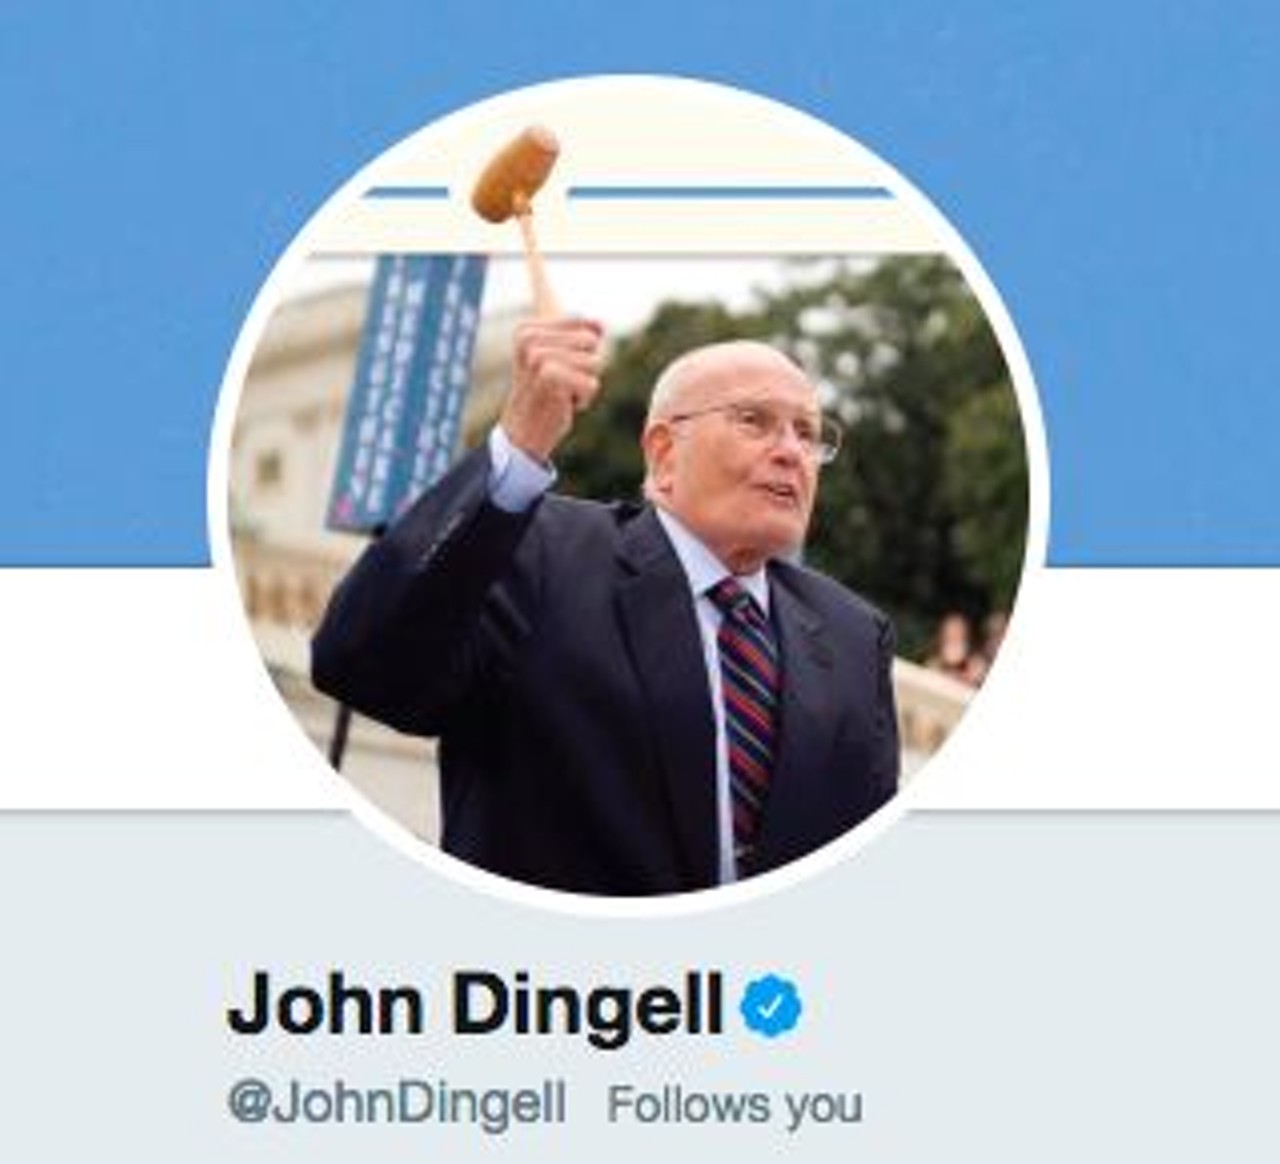 Remembering the Twitter legacy of former Michigan Rep. John Dingell